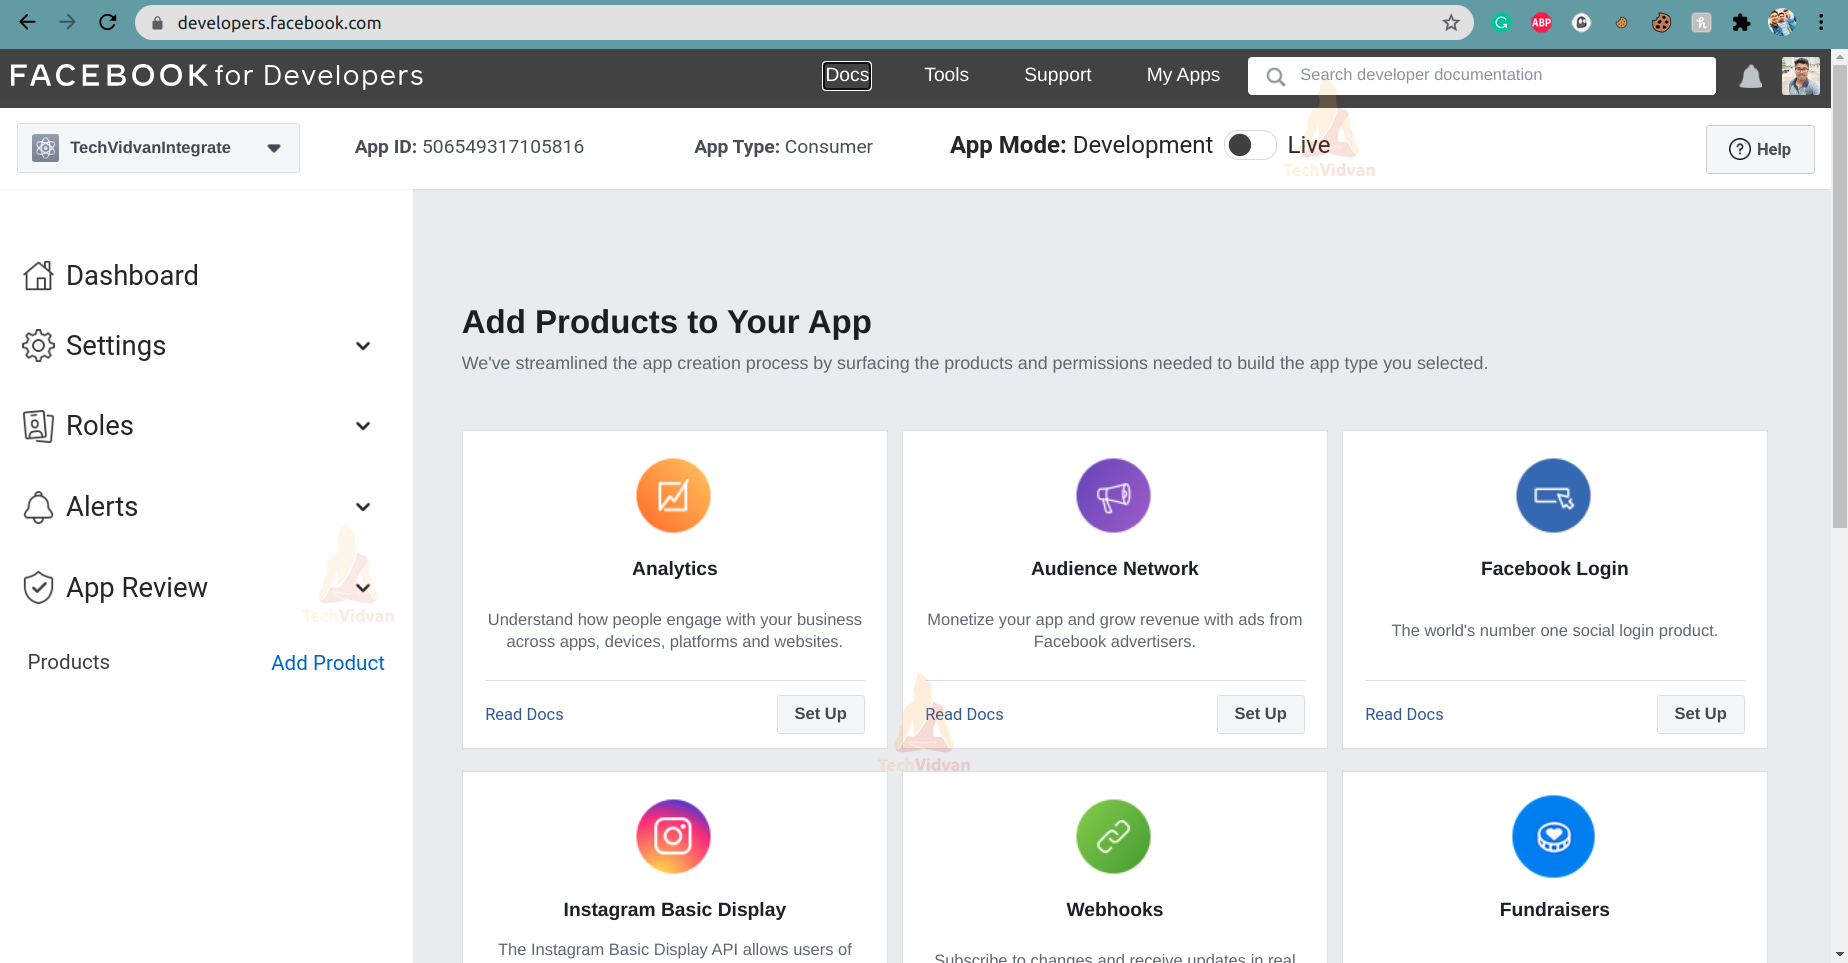 A guide to Facebook Integration with an app and its importance